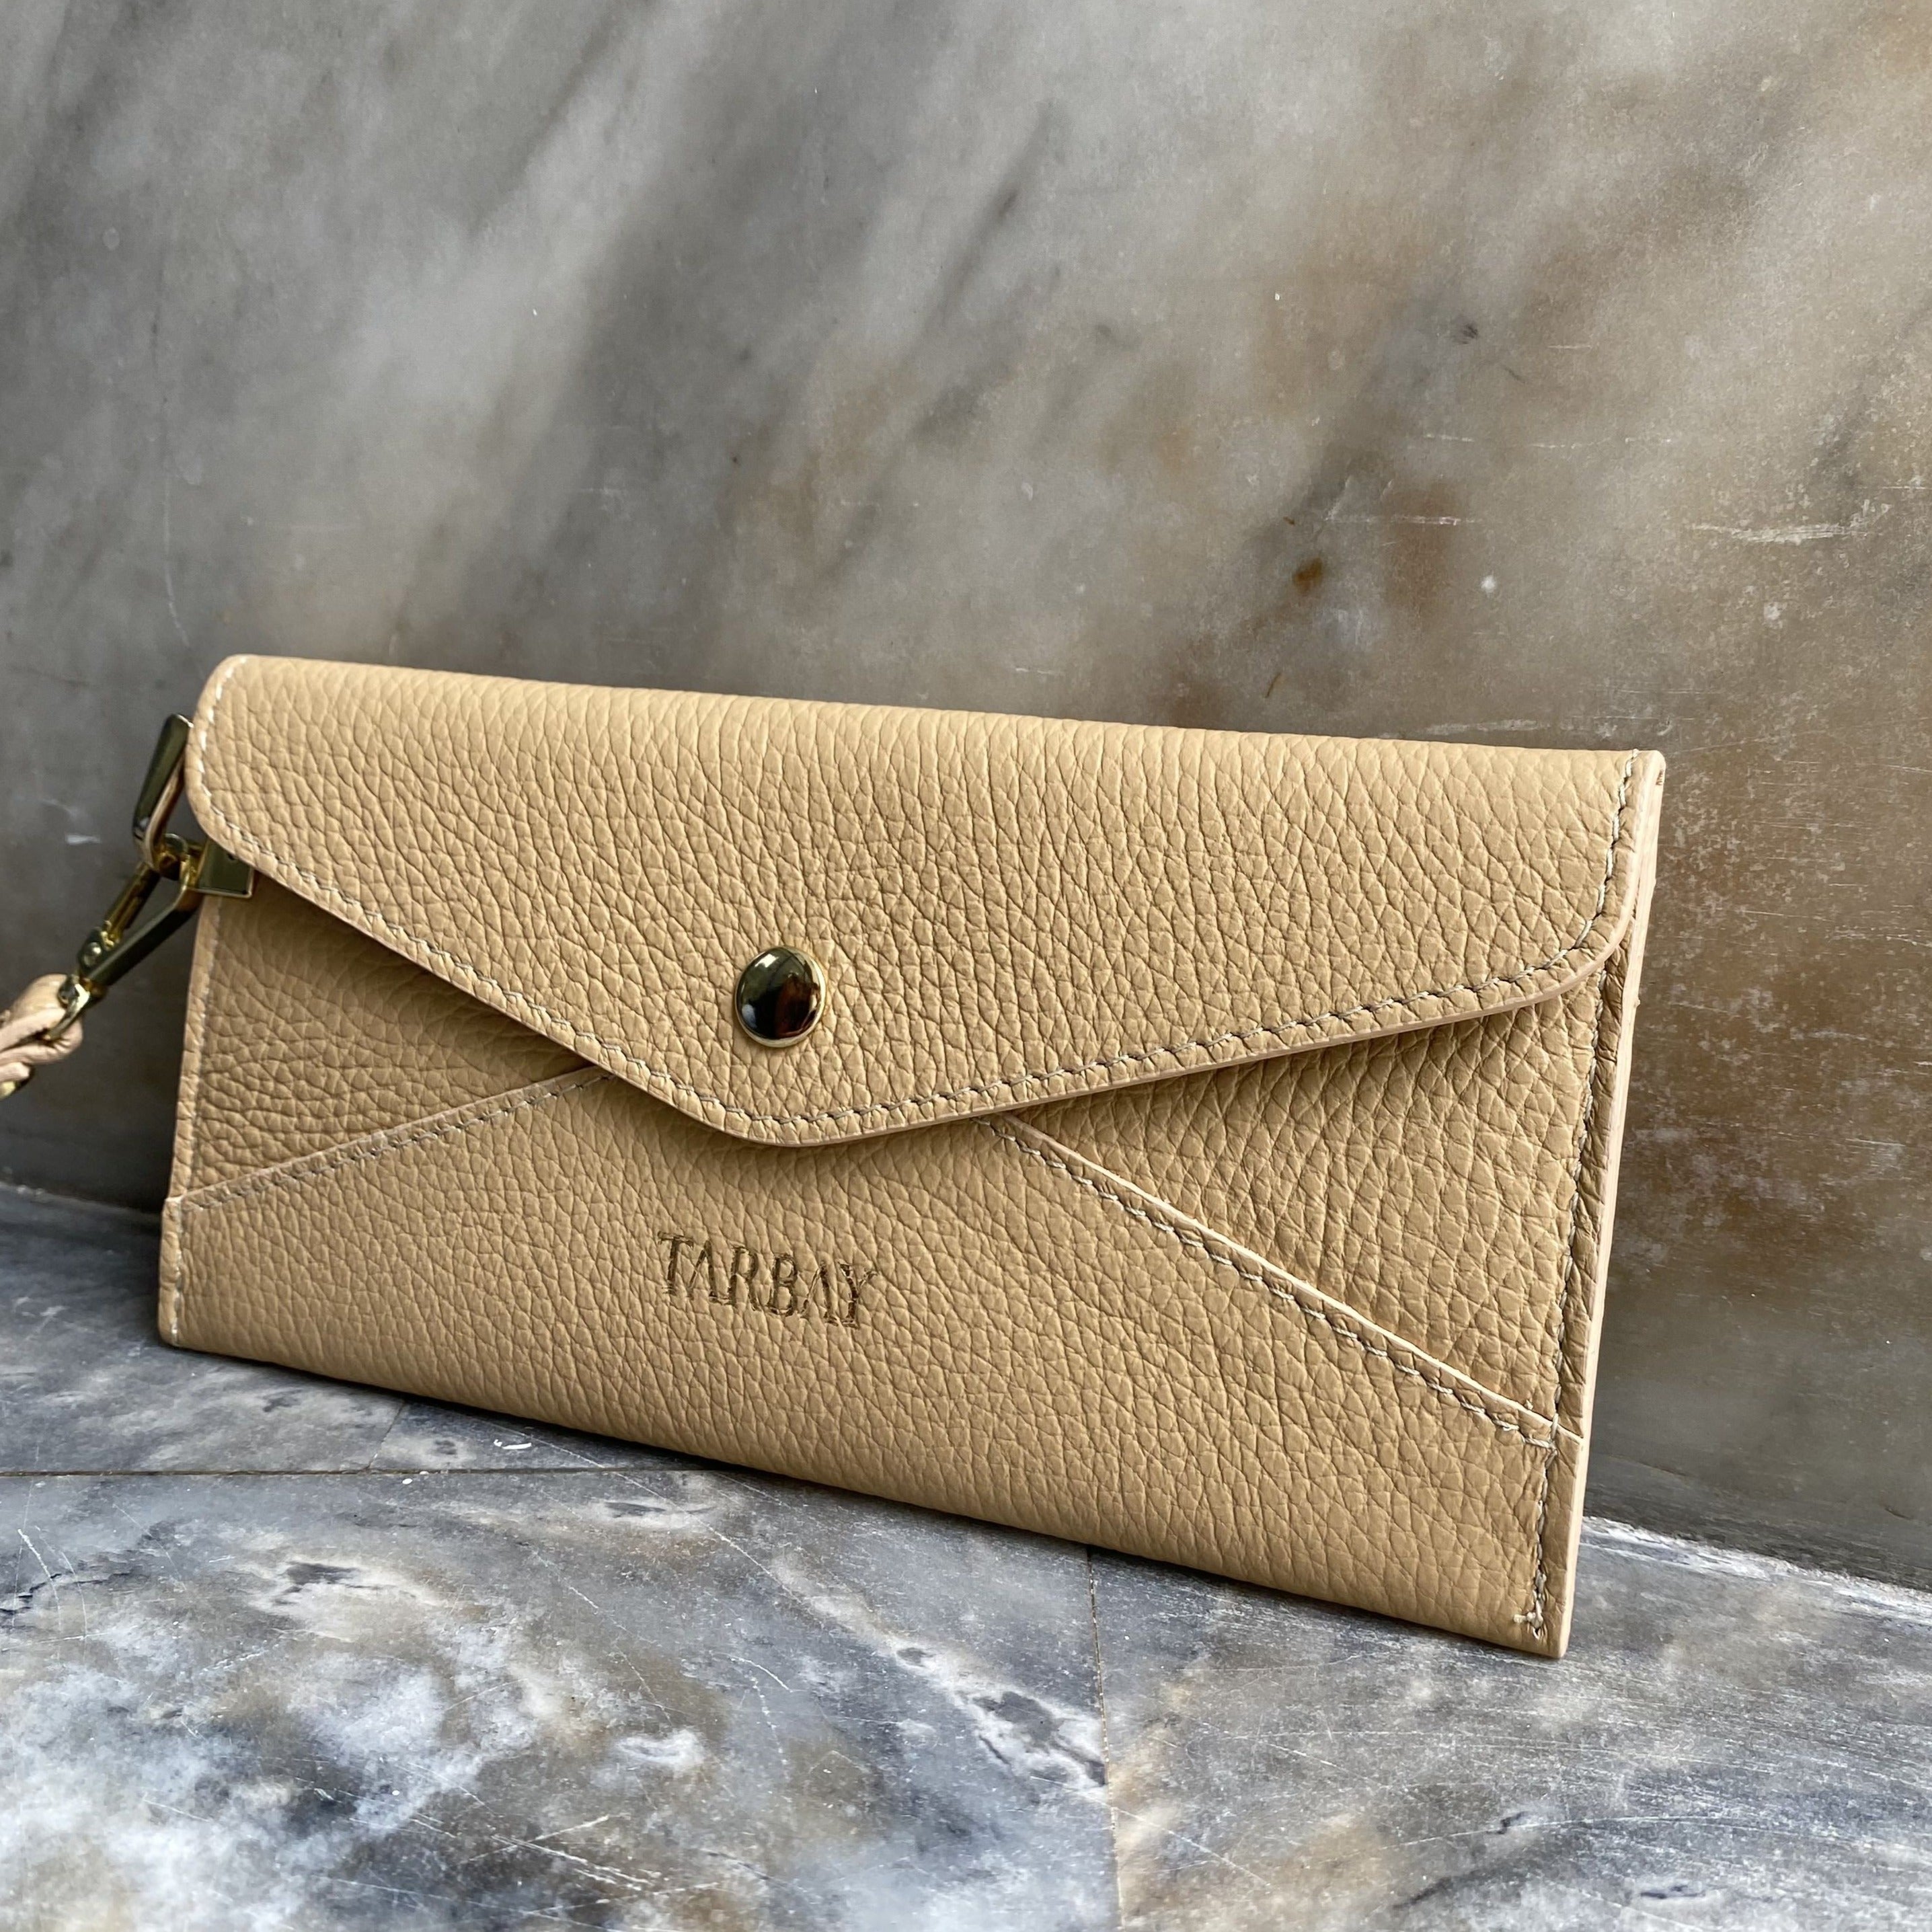 Genuine Leather Wallet #1 - Taupe Wallets TARBAY   